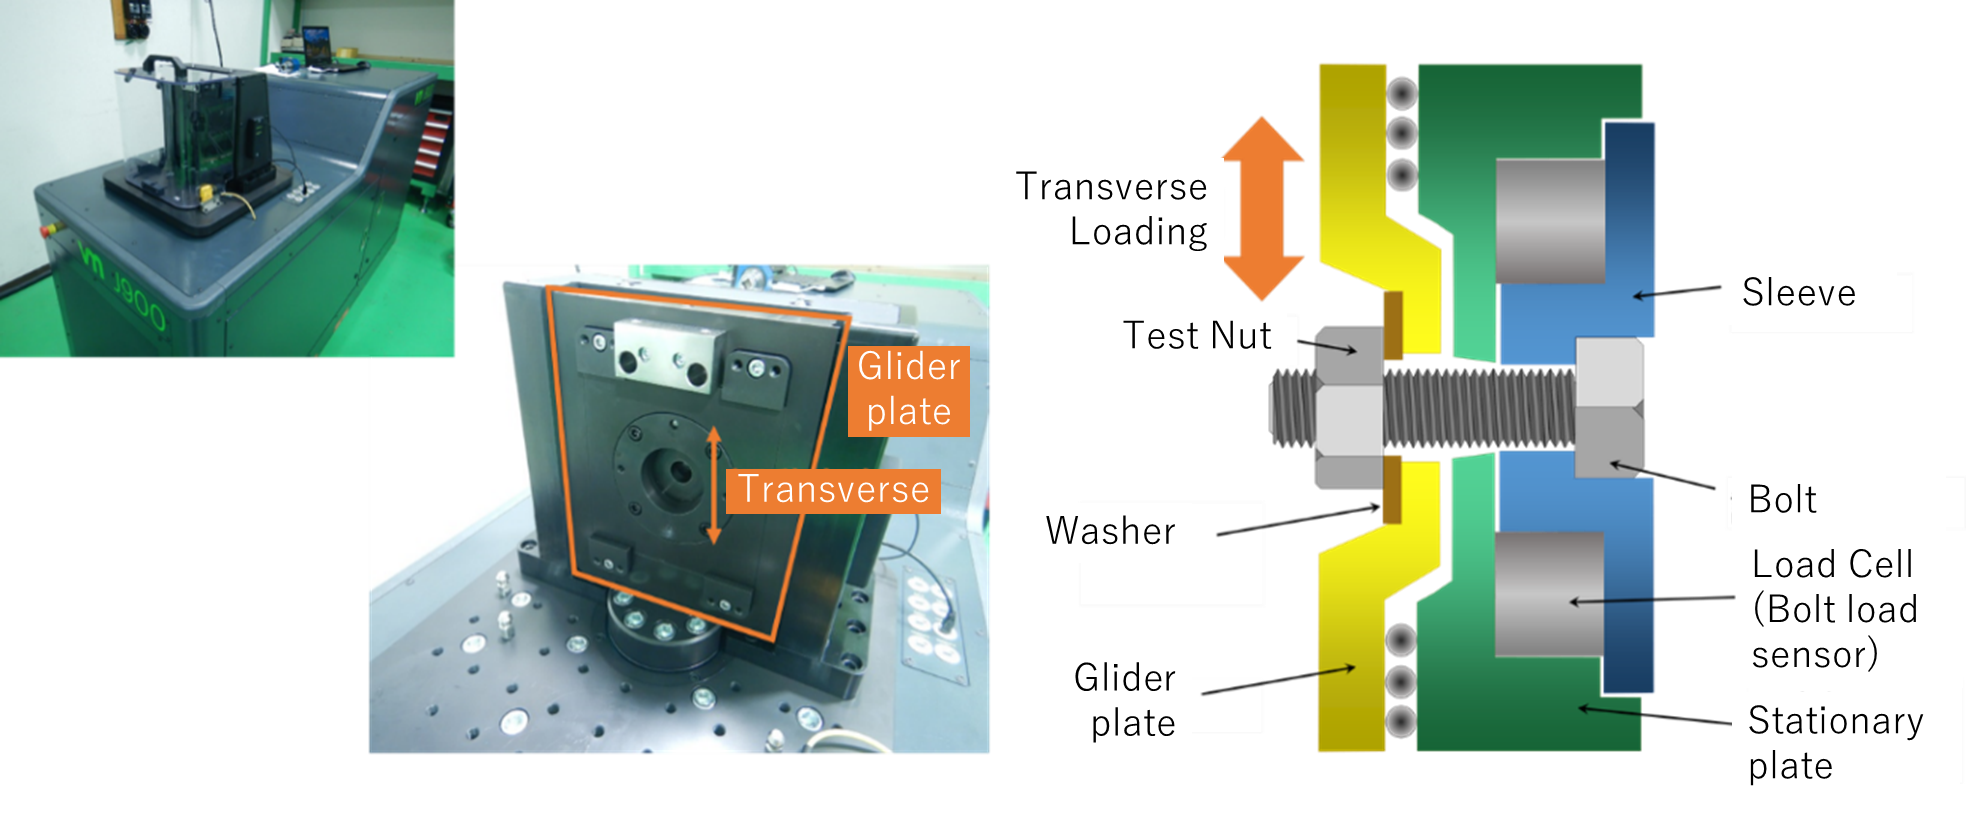 A junker test machine is comprised of a washer, sleeve, glider plate, load cell and stationary plate.